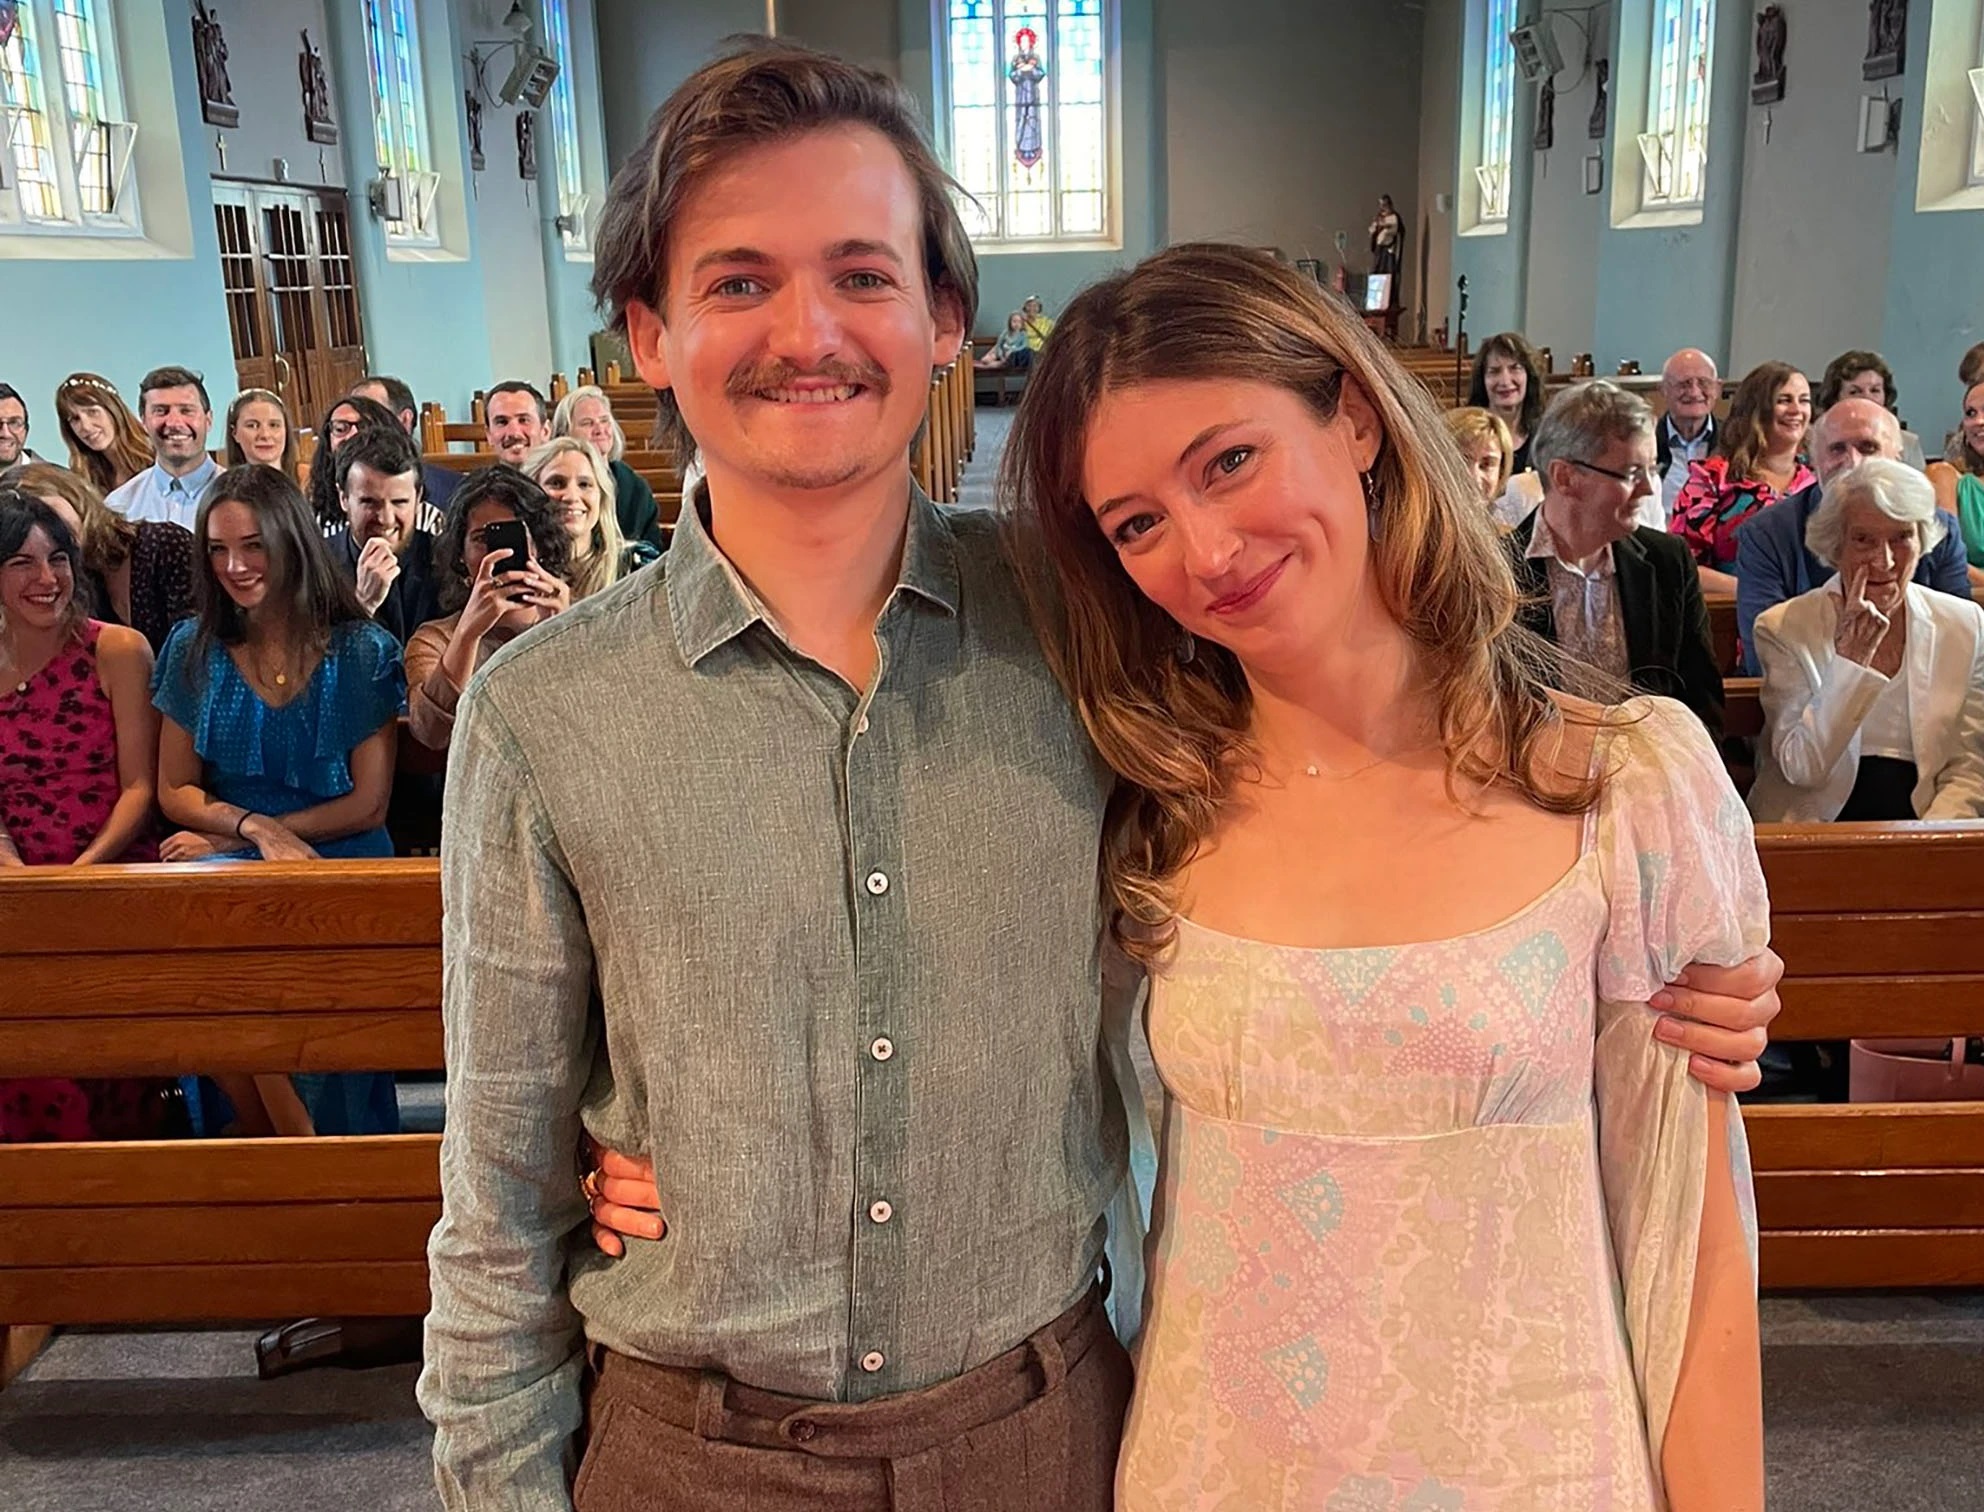 Jack Gleeson Who Played Joffrey in Game of Thrones Got Married